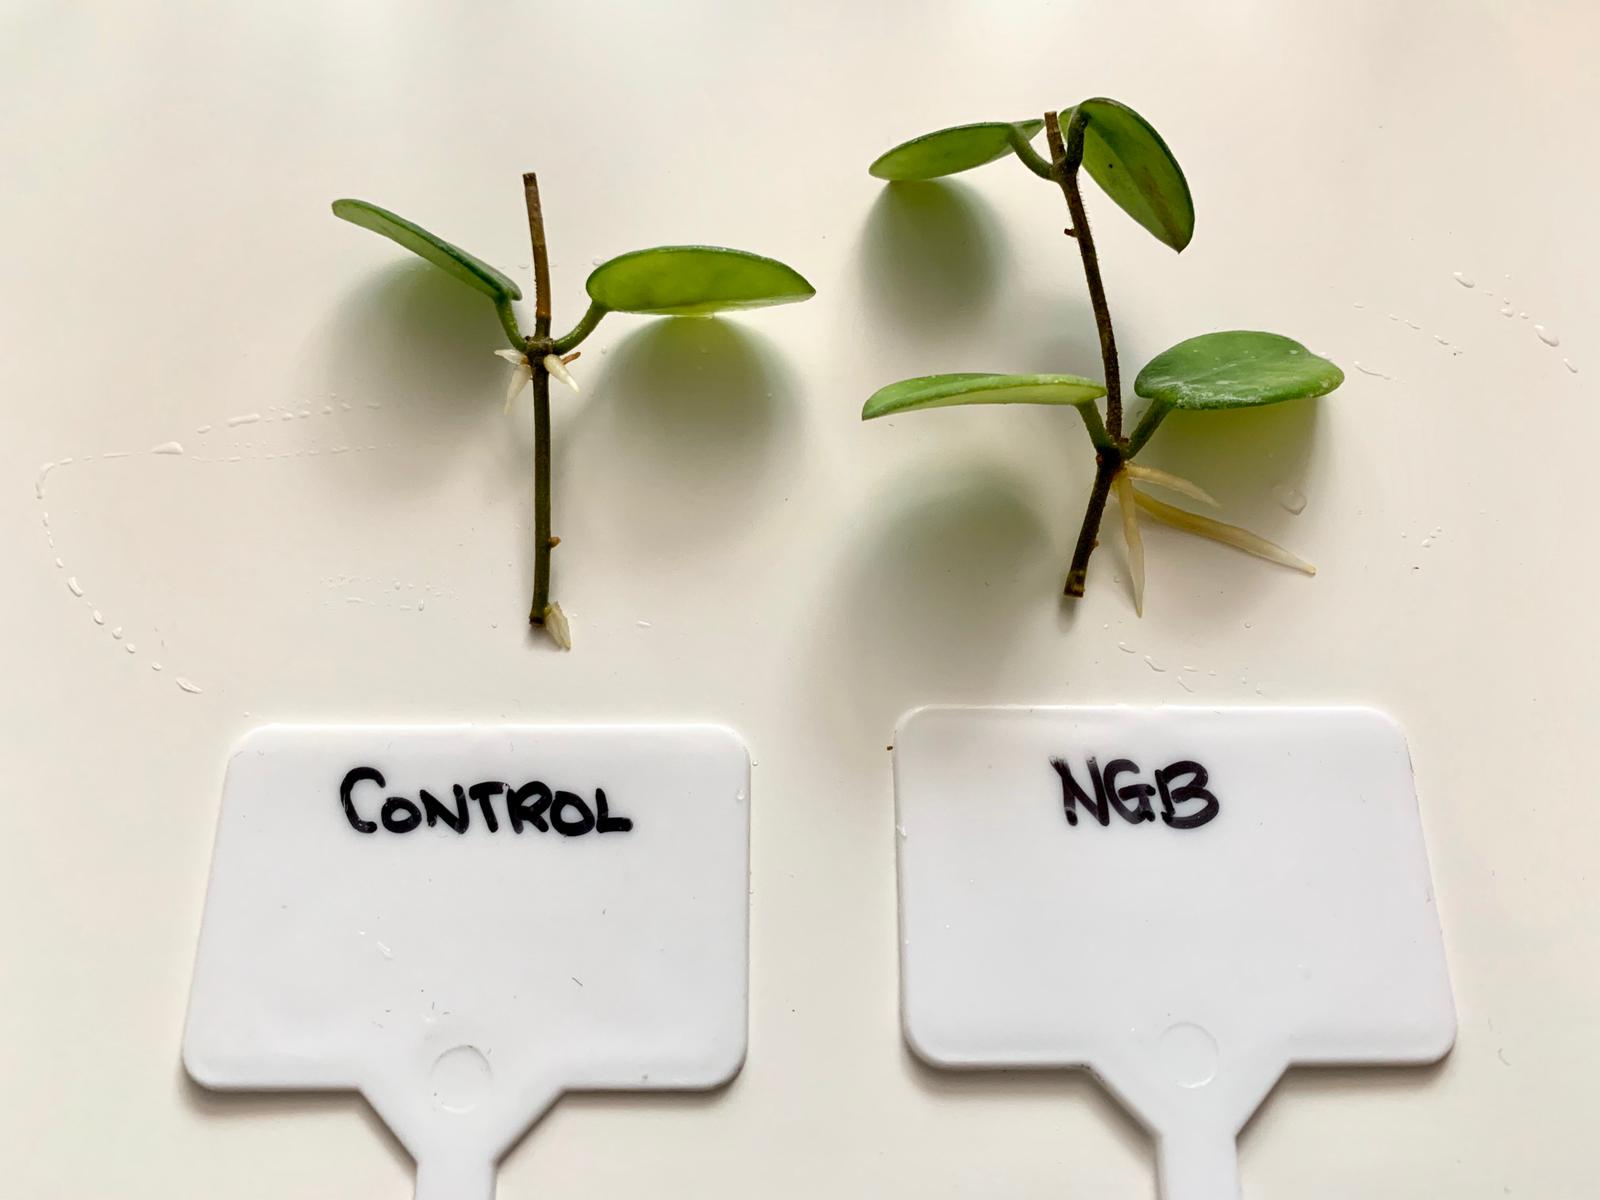 sprout comparison between non-treated and treated seedlings